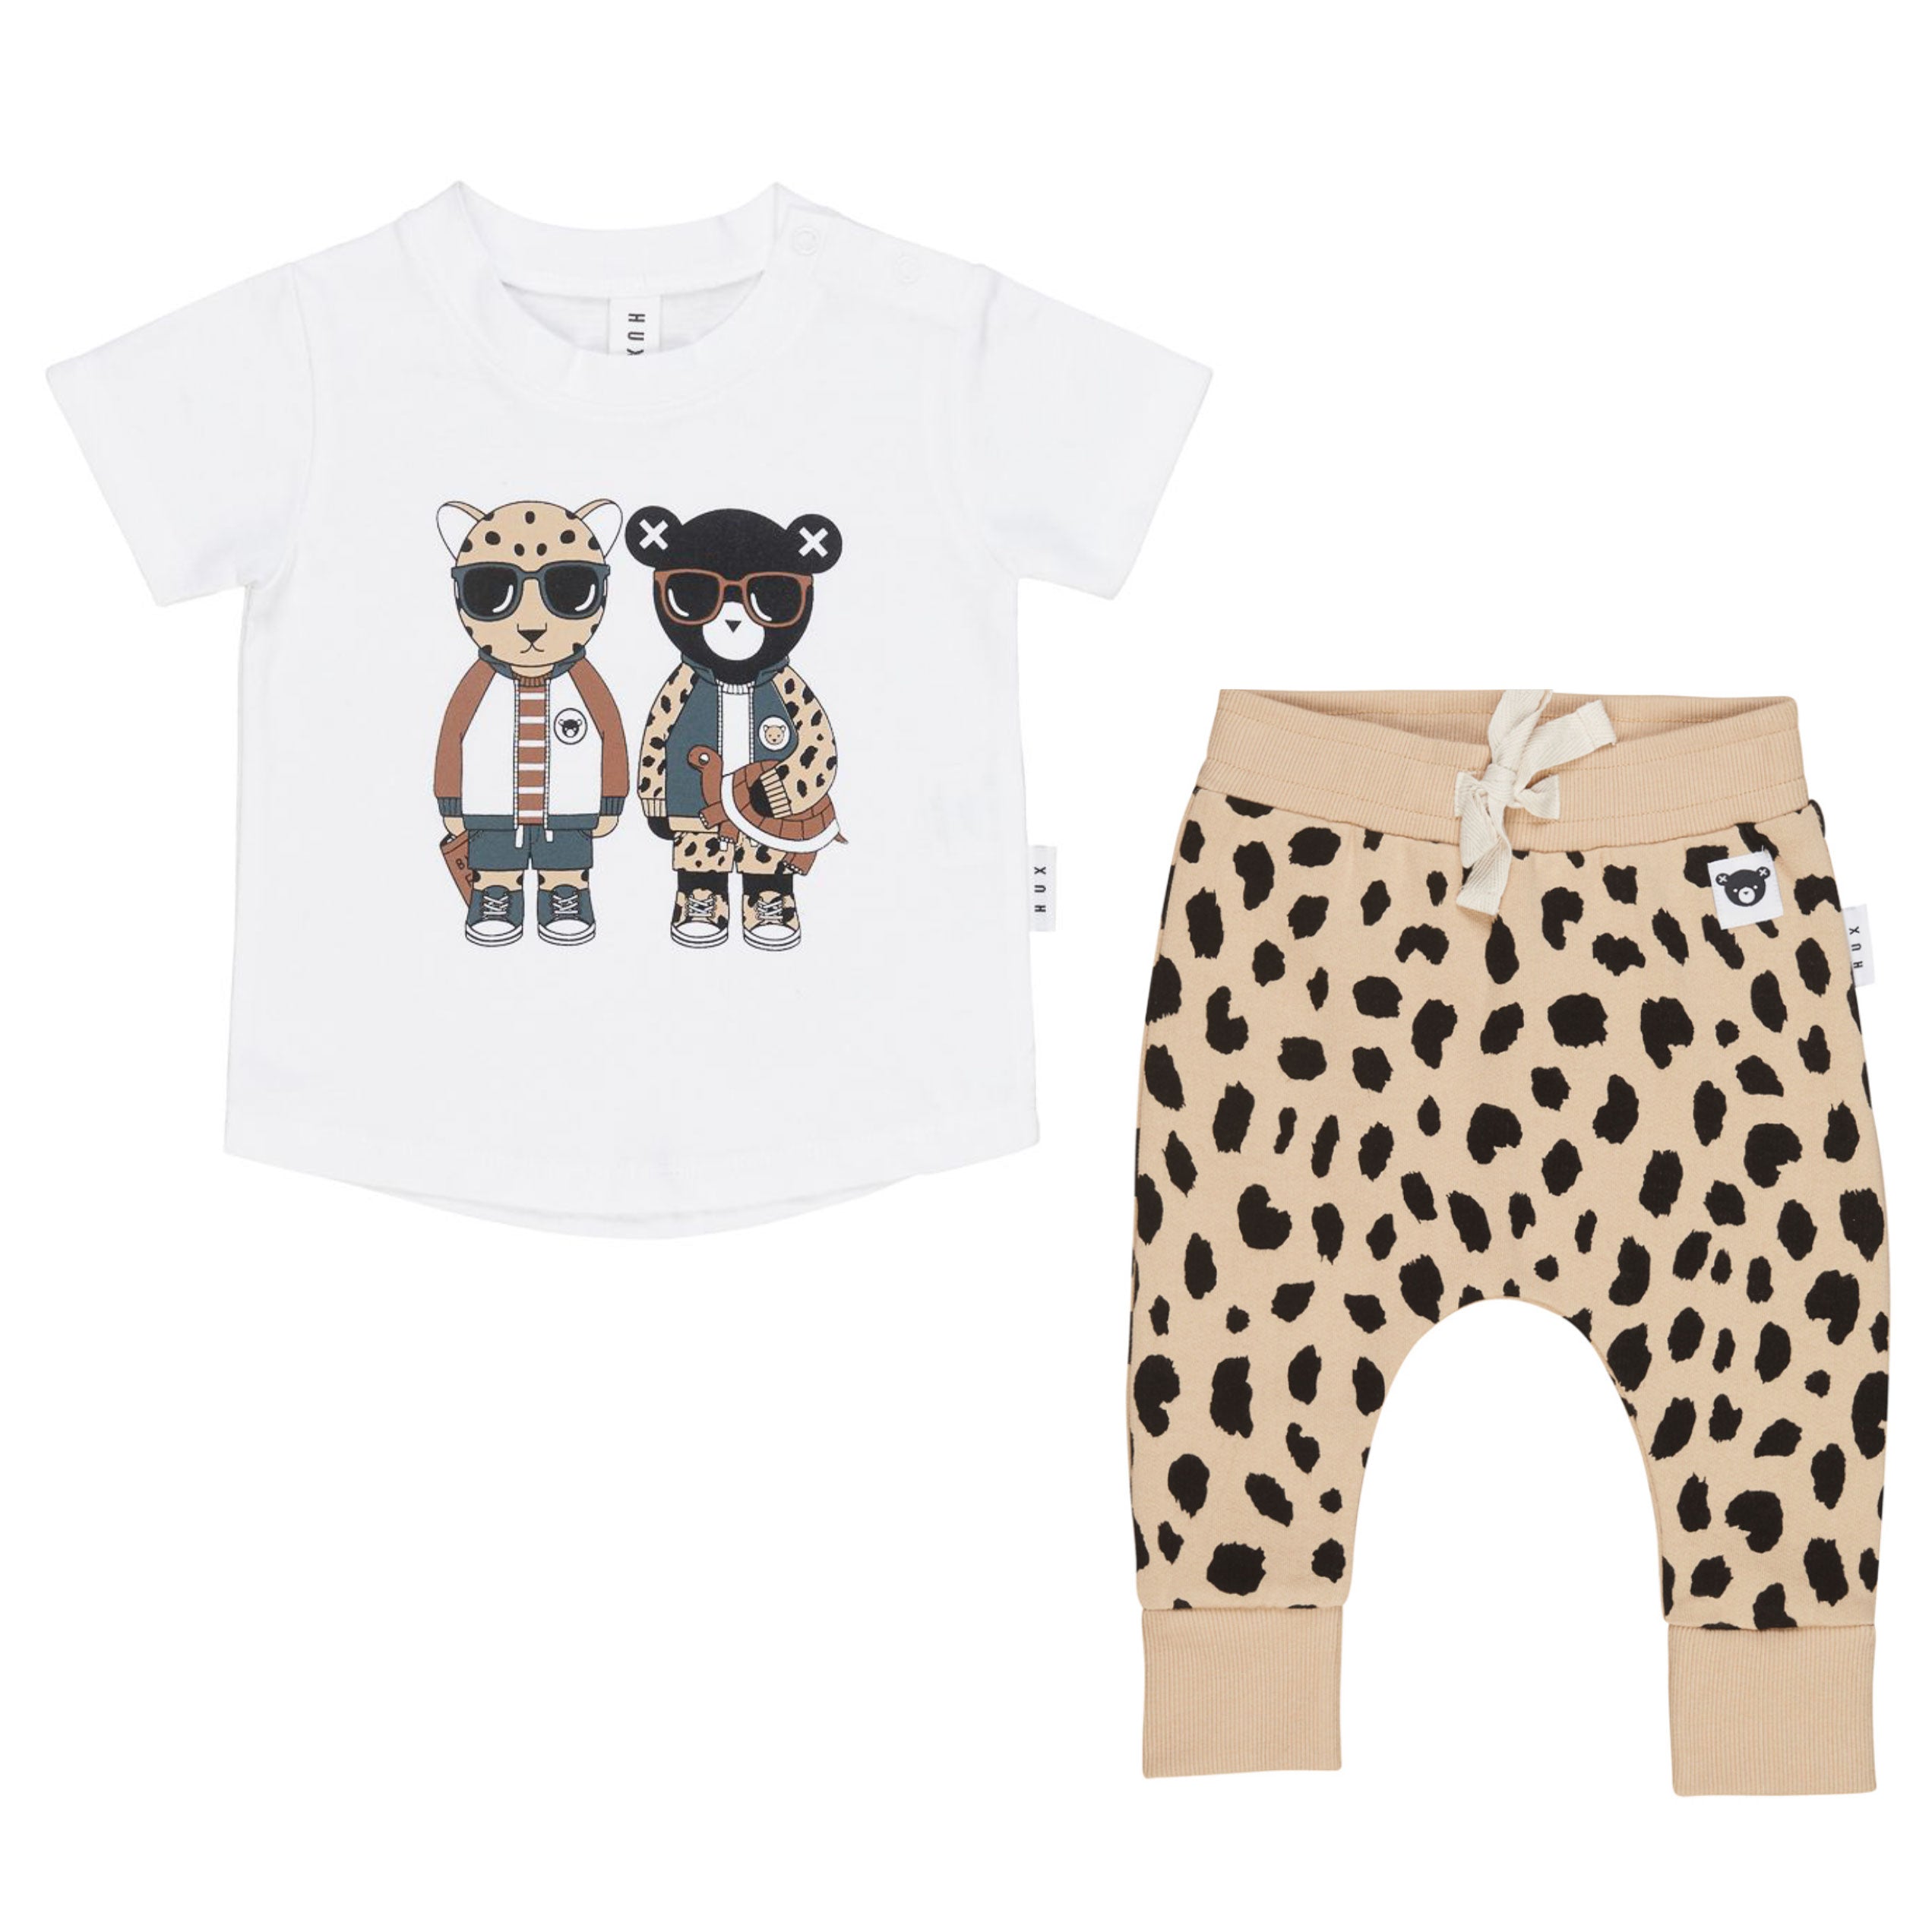 Huxbaby baby gift  at Bonjour Baby Baskets trendy baby gifts